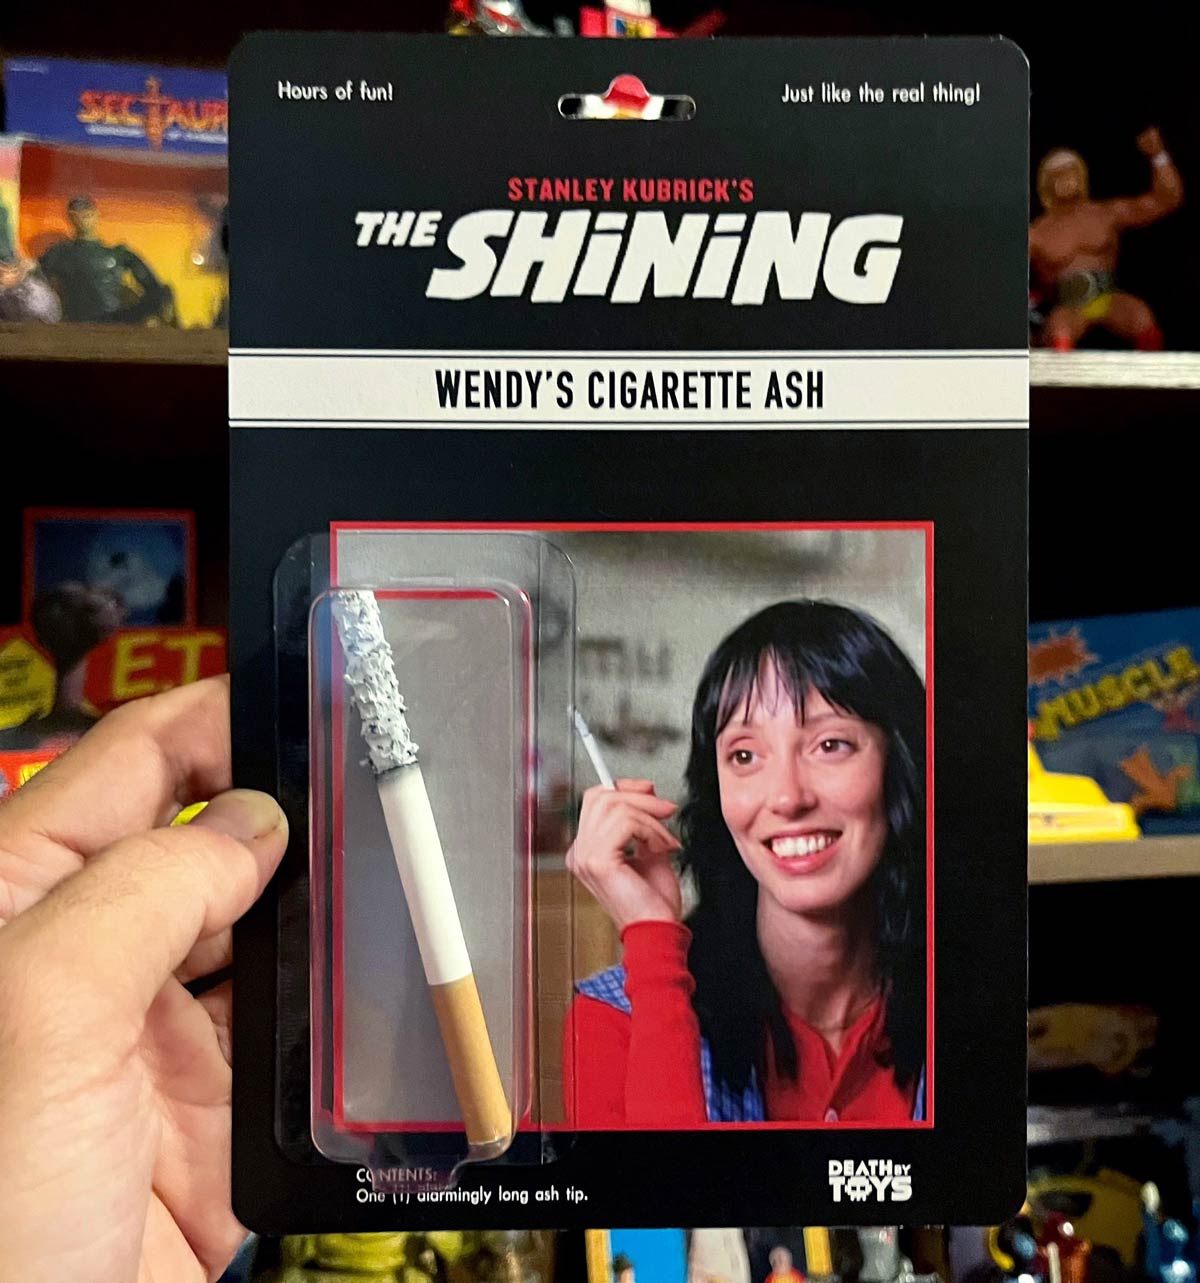 I based this toy on one of the most tense and unsettling moments from The Shining